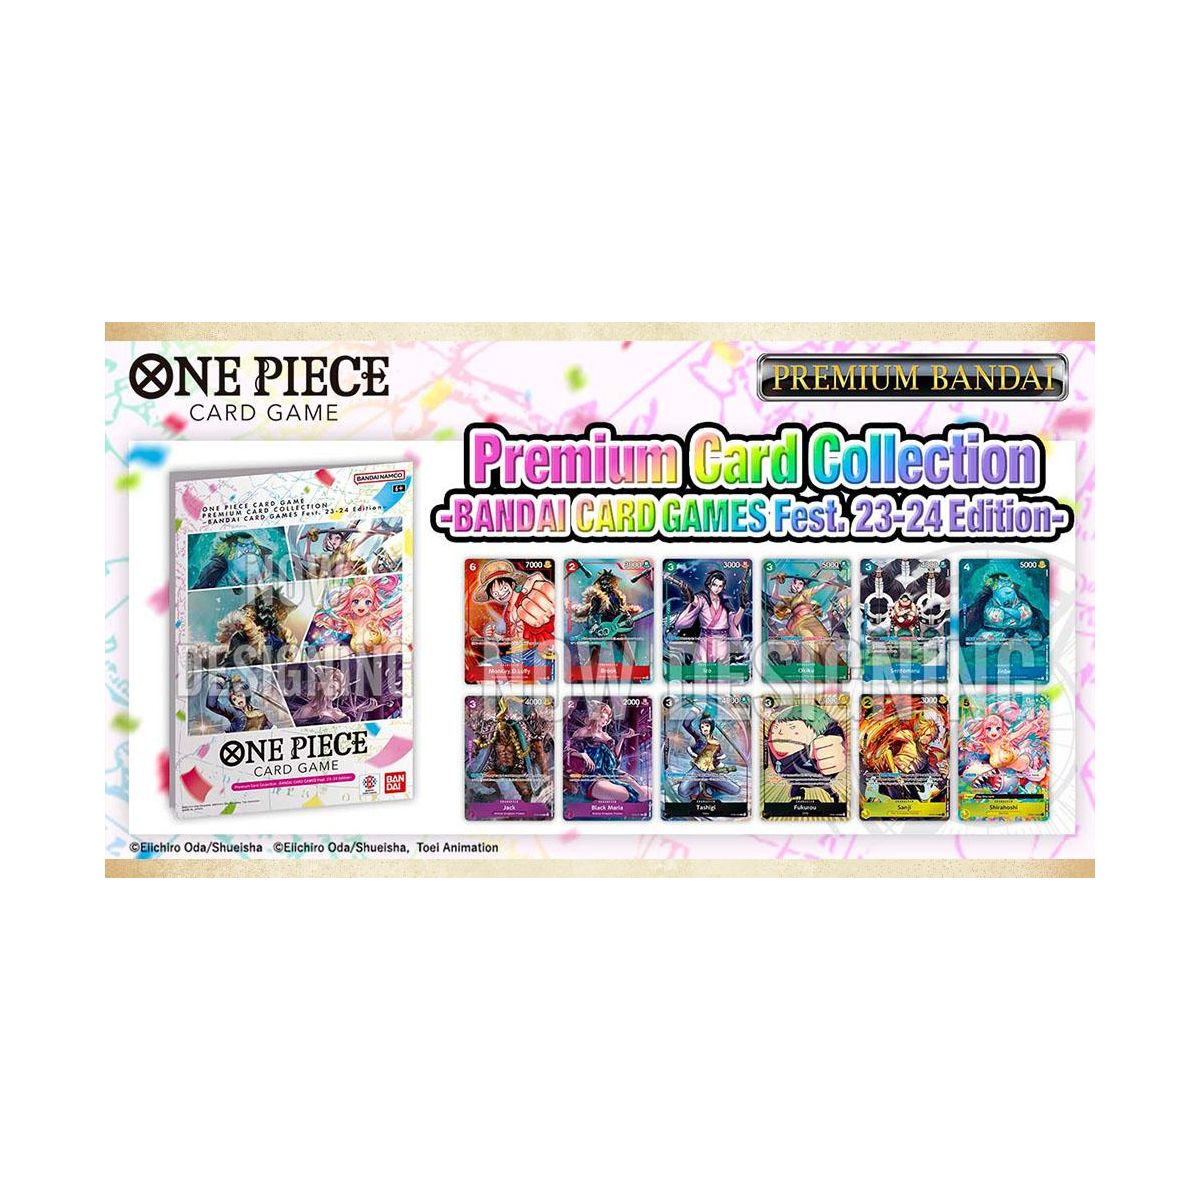 One Piece Card Game - Premium Card Collection - BANDAI CARD GAMES Fest. 23-24 Edition - Anglais